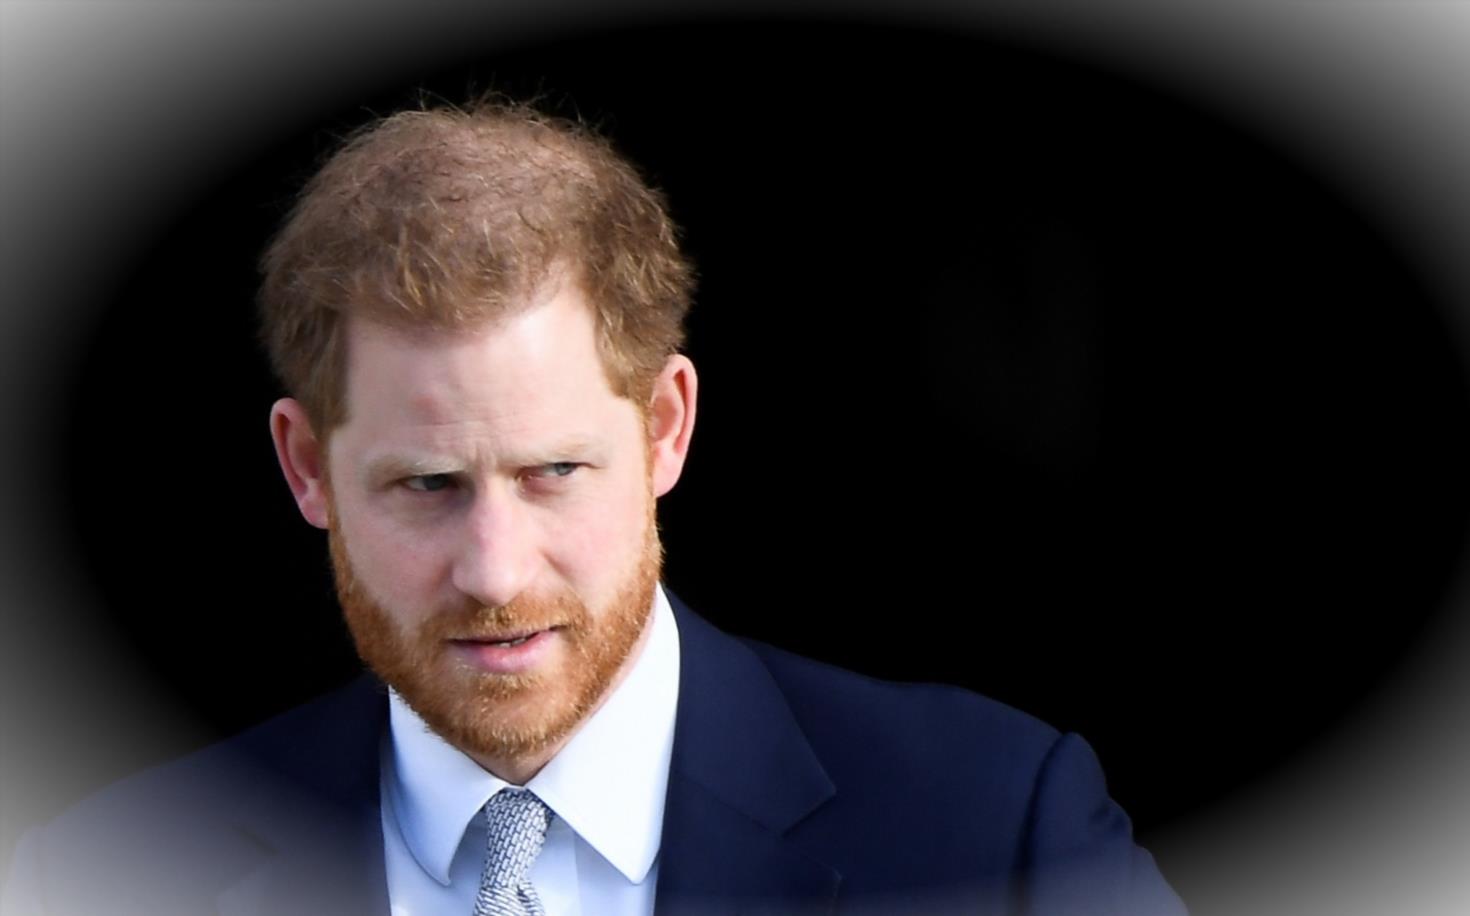 Prince Harry Faces Difficult Coronation Without Meghans 1